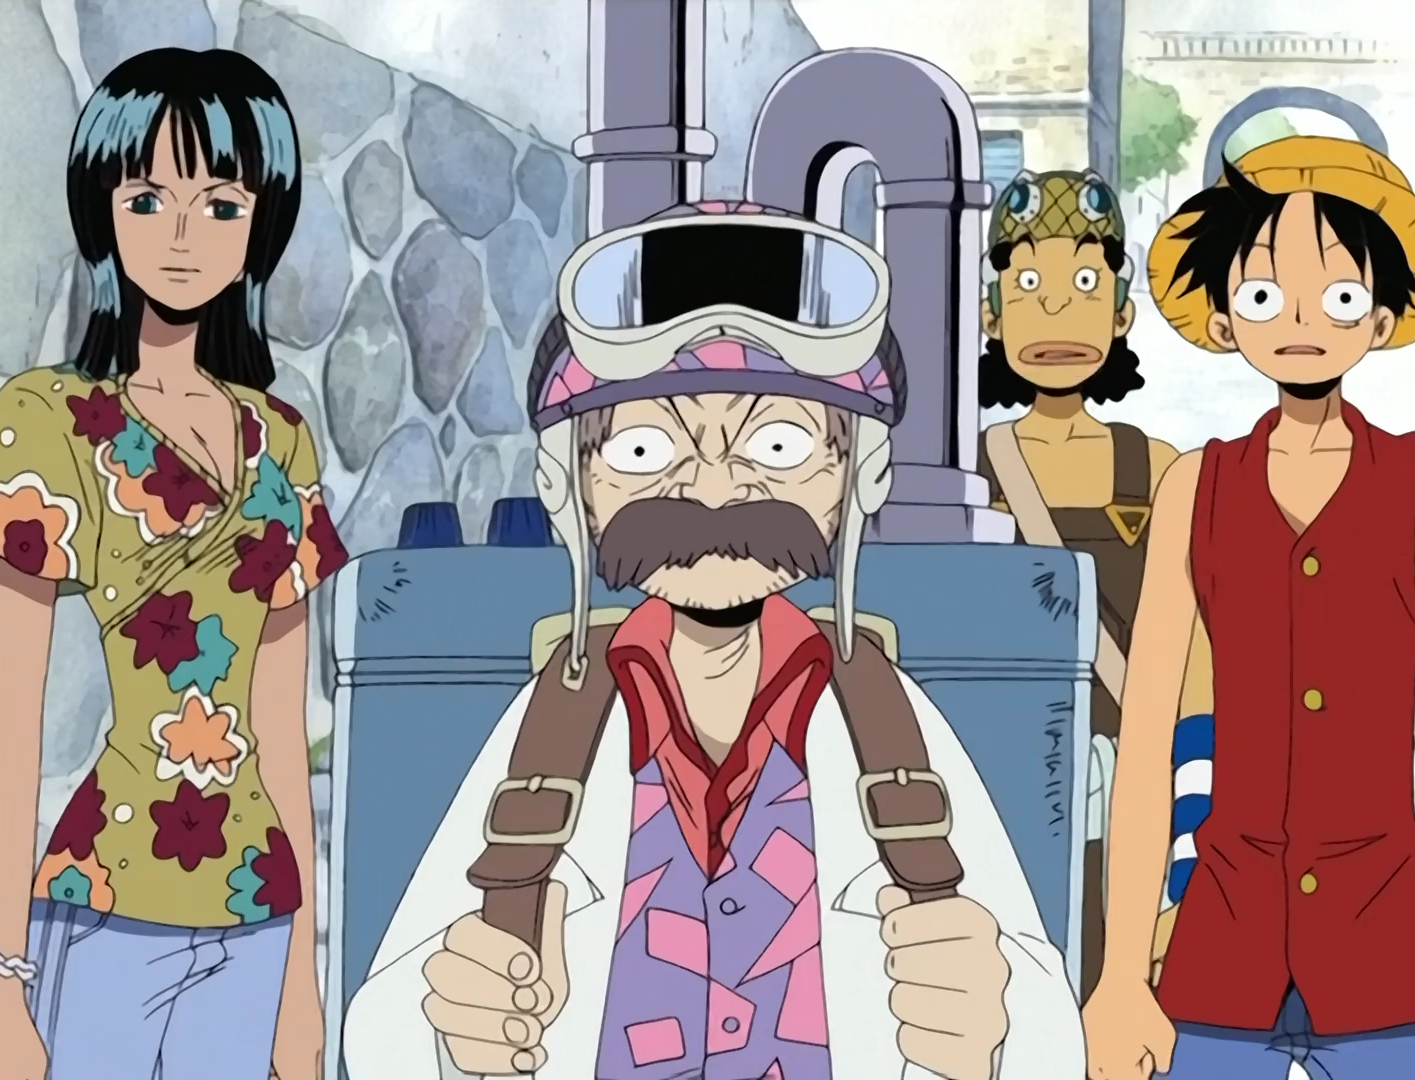 One Piece Henzo and his inventions with the Straw Hats